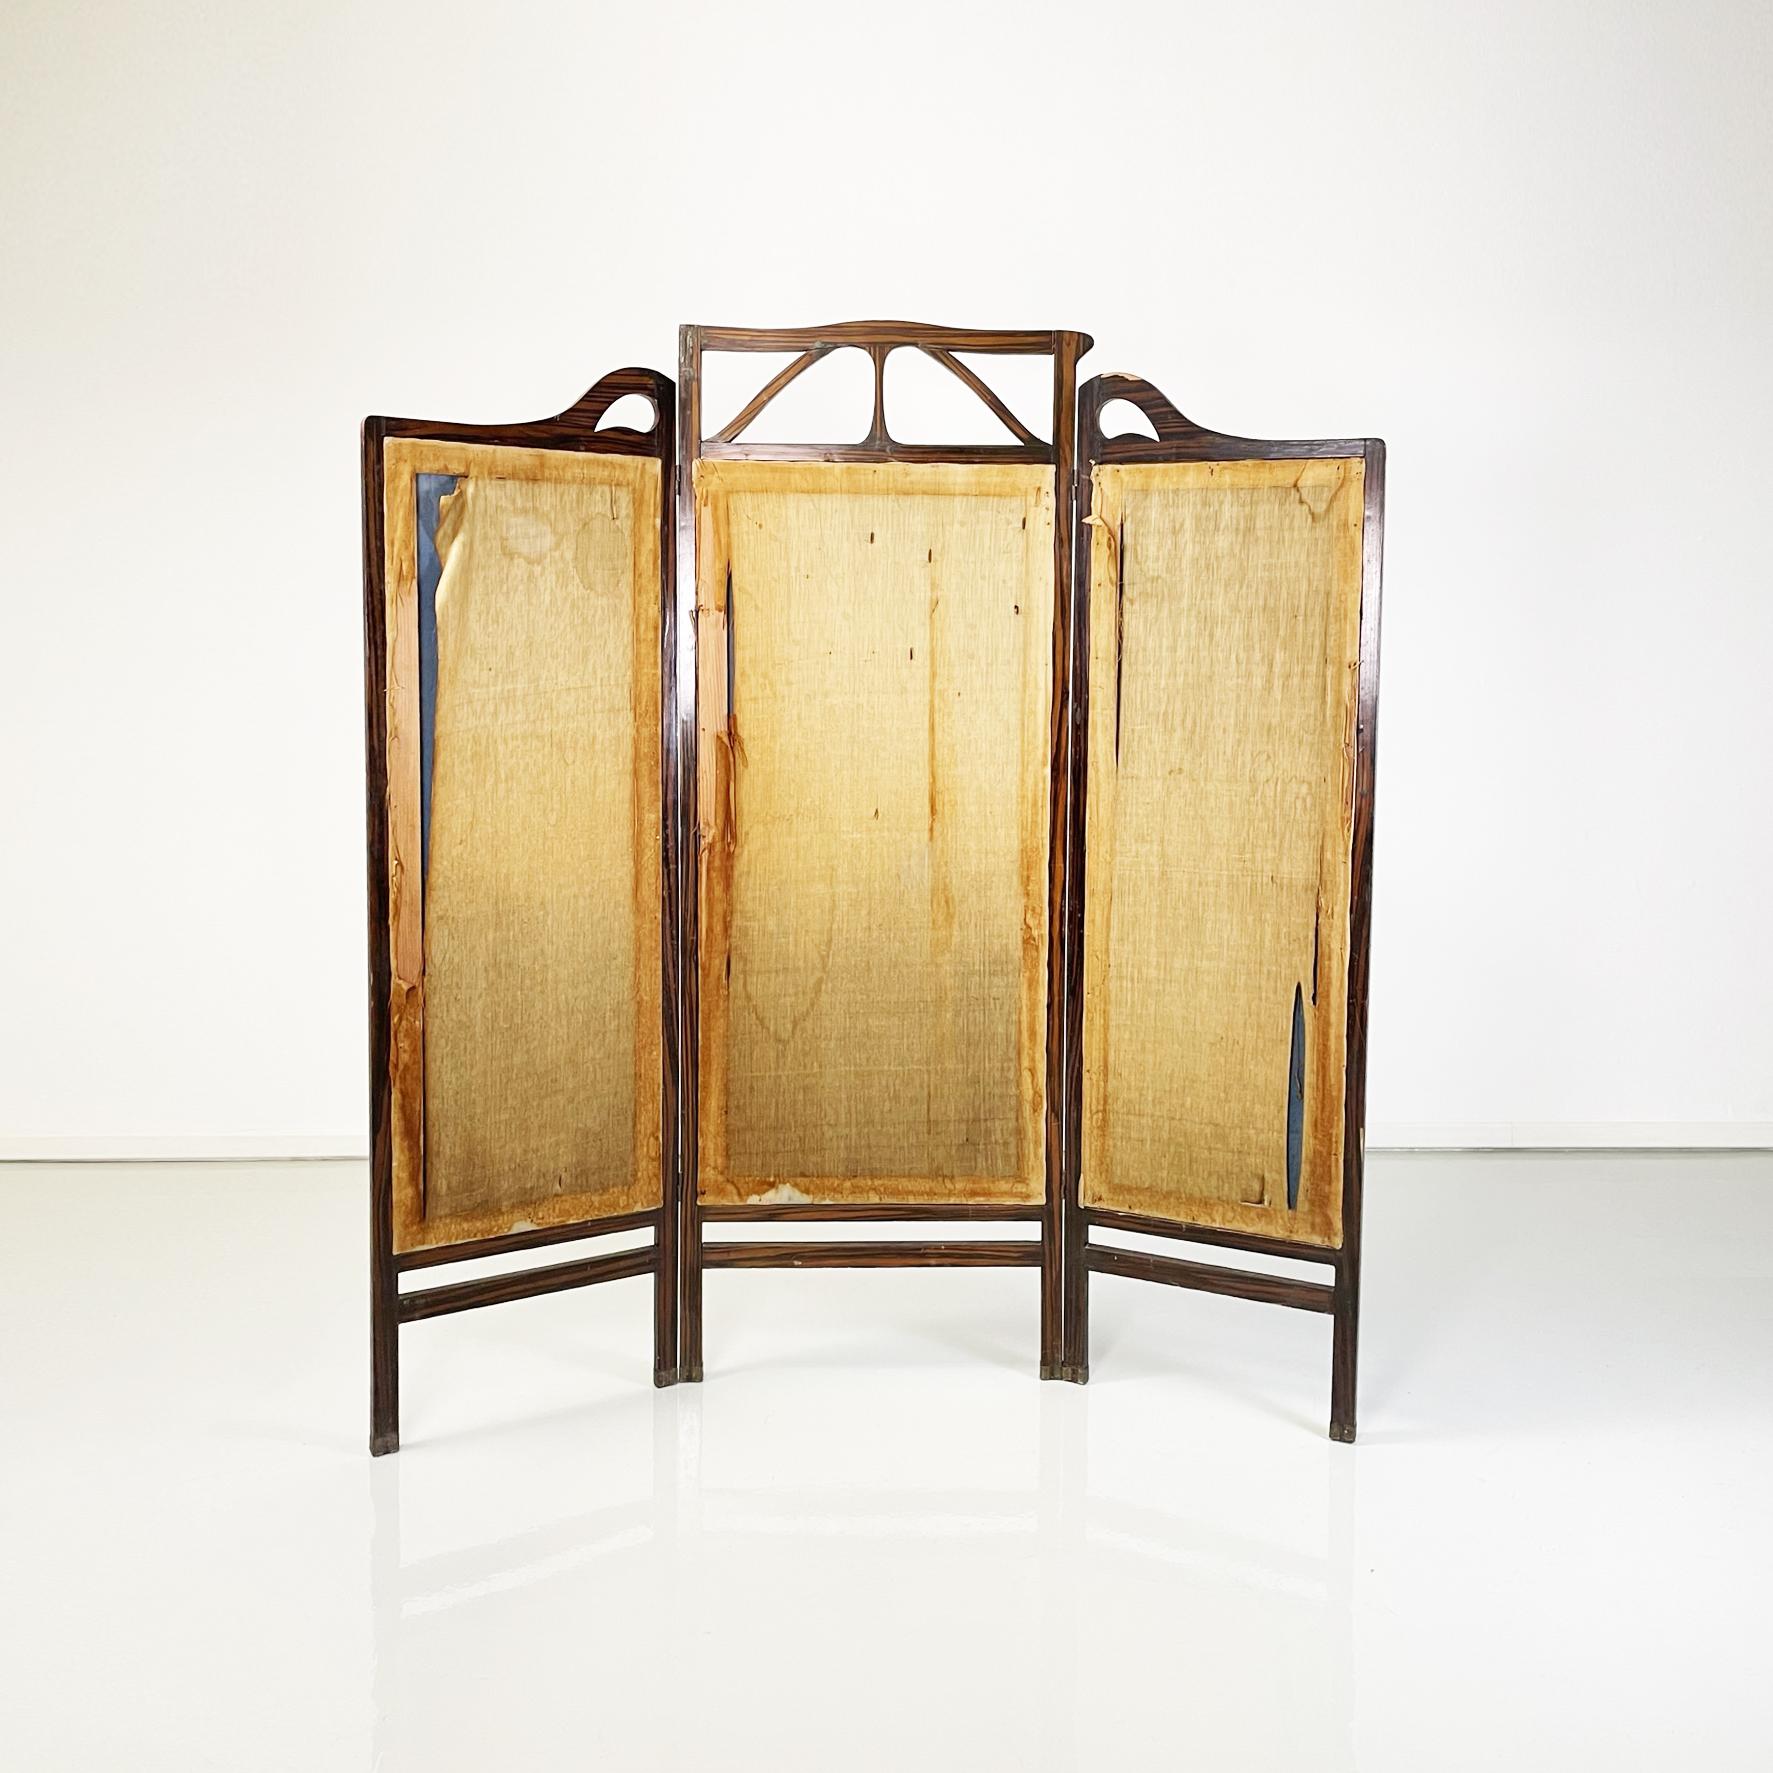 Italian Antique Three-Door Screen Hand Painted on Fabric and Wood, Early 1900s In Good Condition For Sale In MIlano, IT